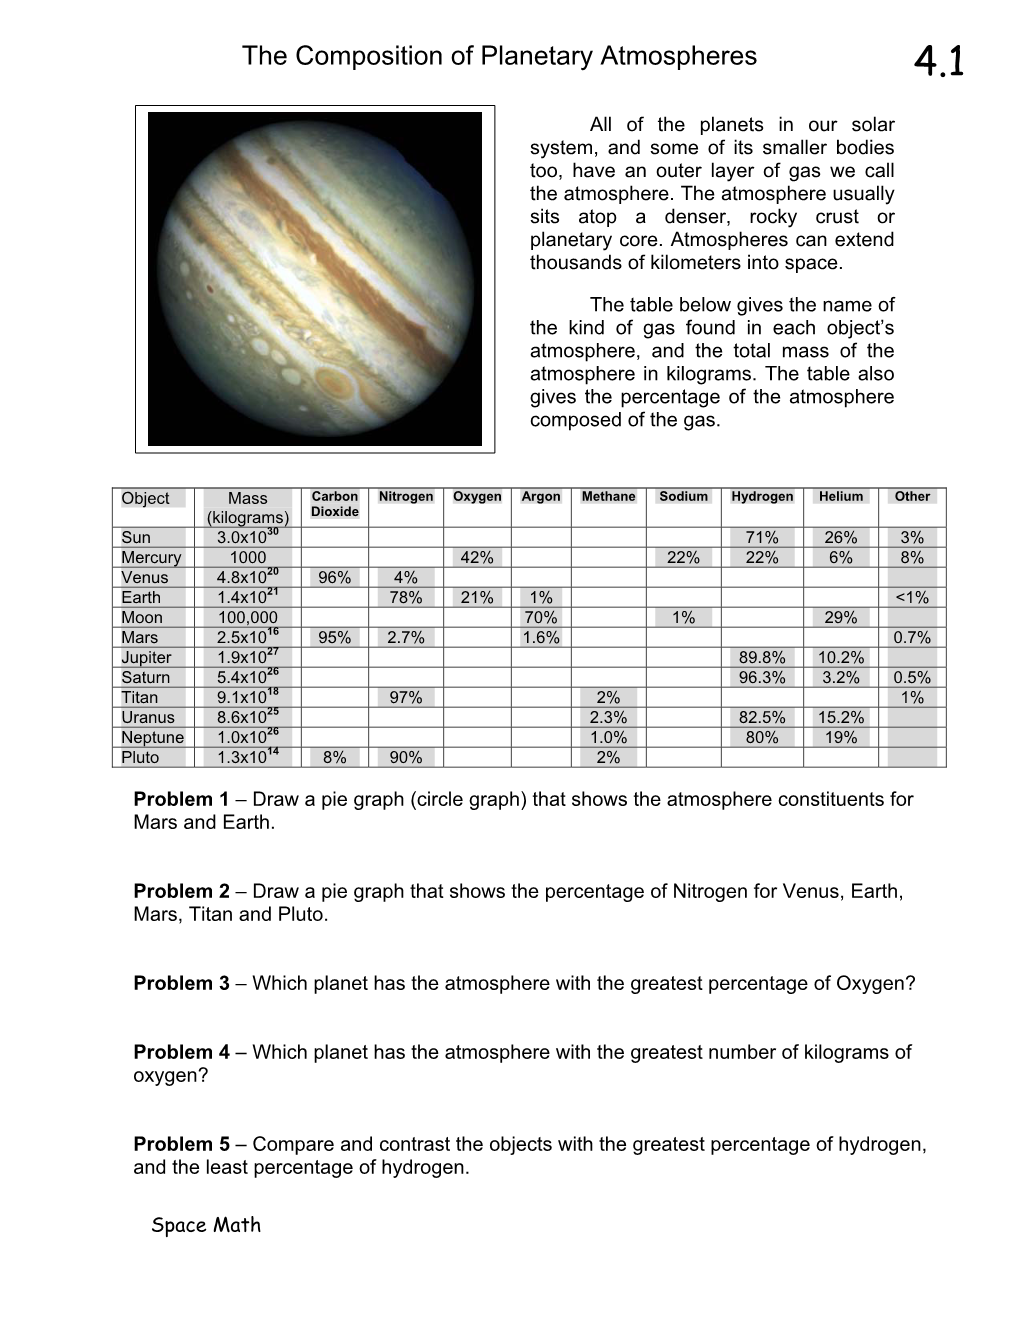 Gas Giants, Atmospheres and Weather